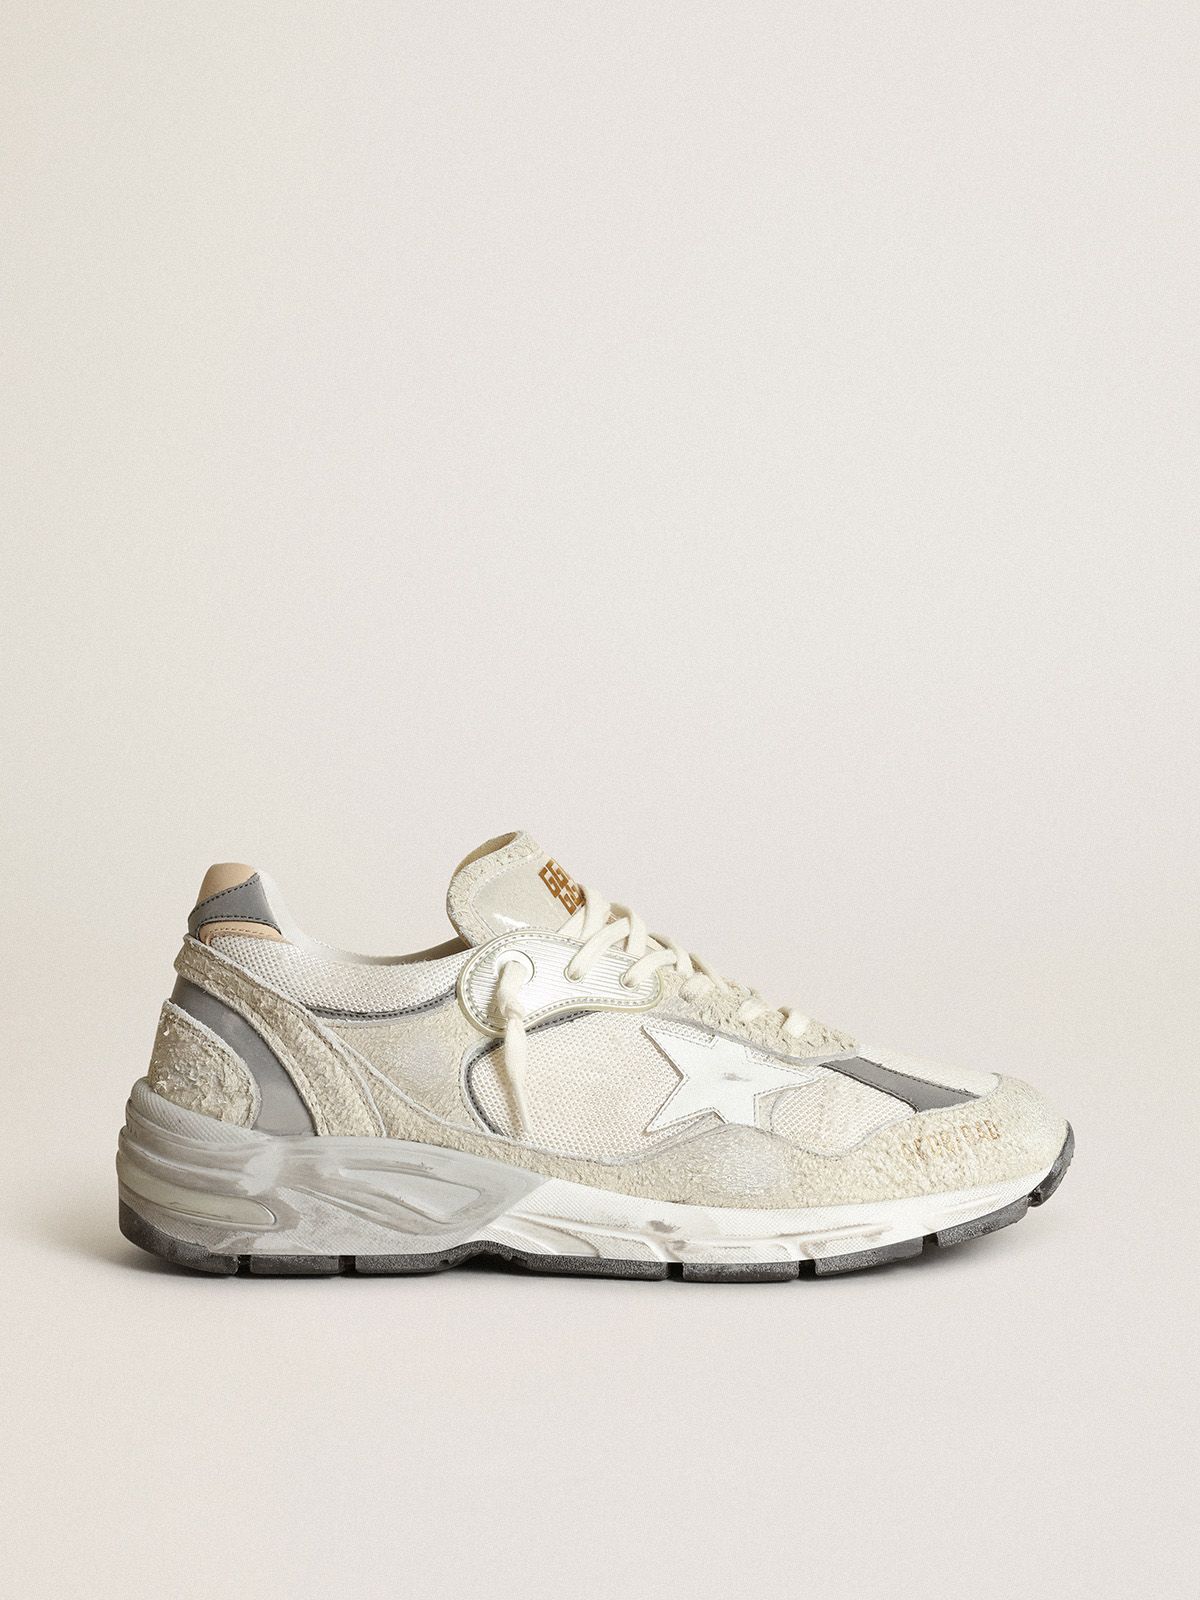 Goldengoose Ball Star Dad-Star sneakers in white and gray suede with white leather star